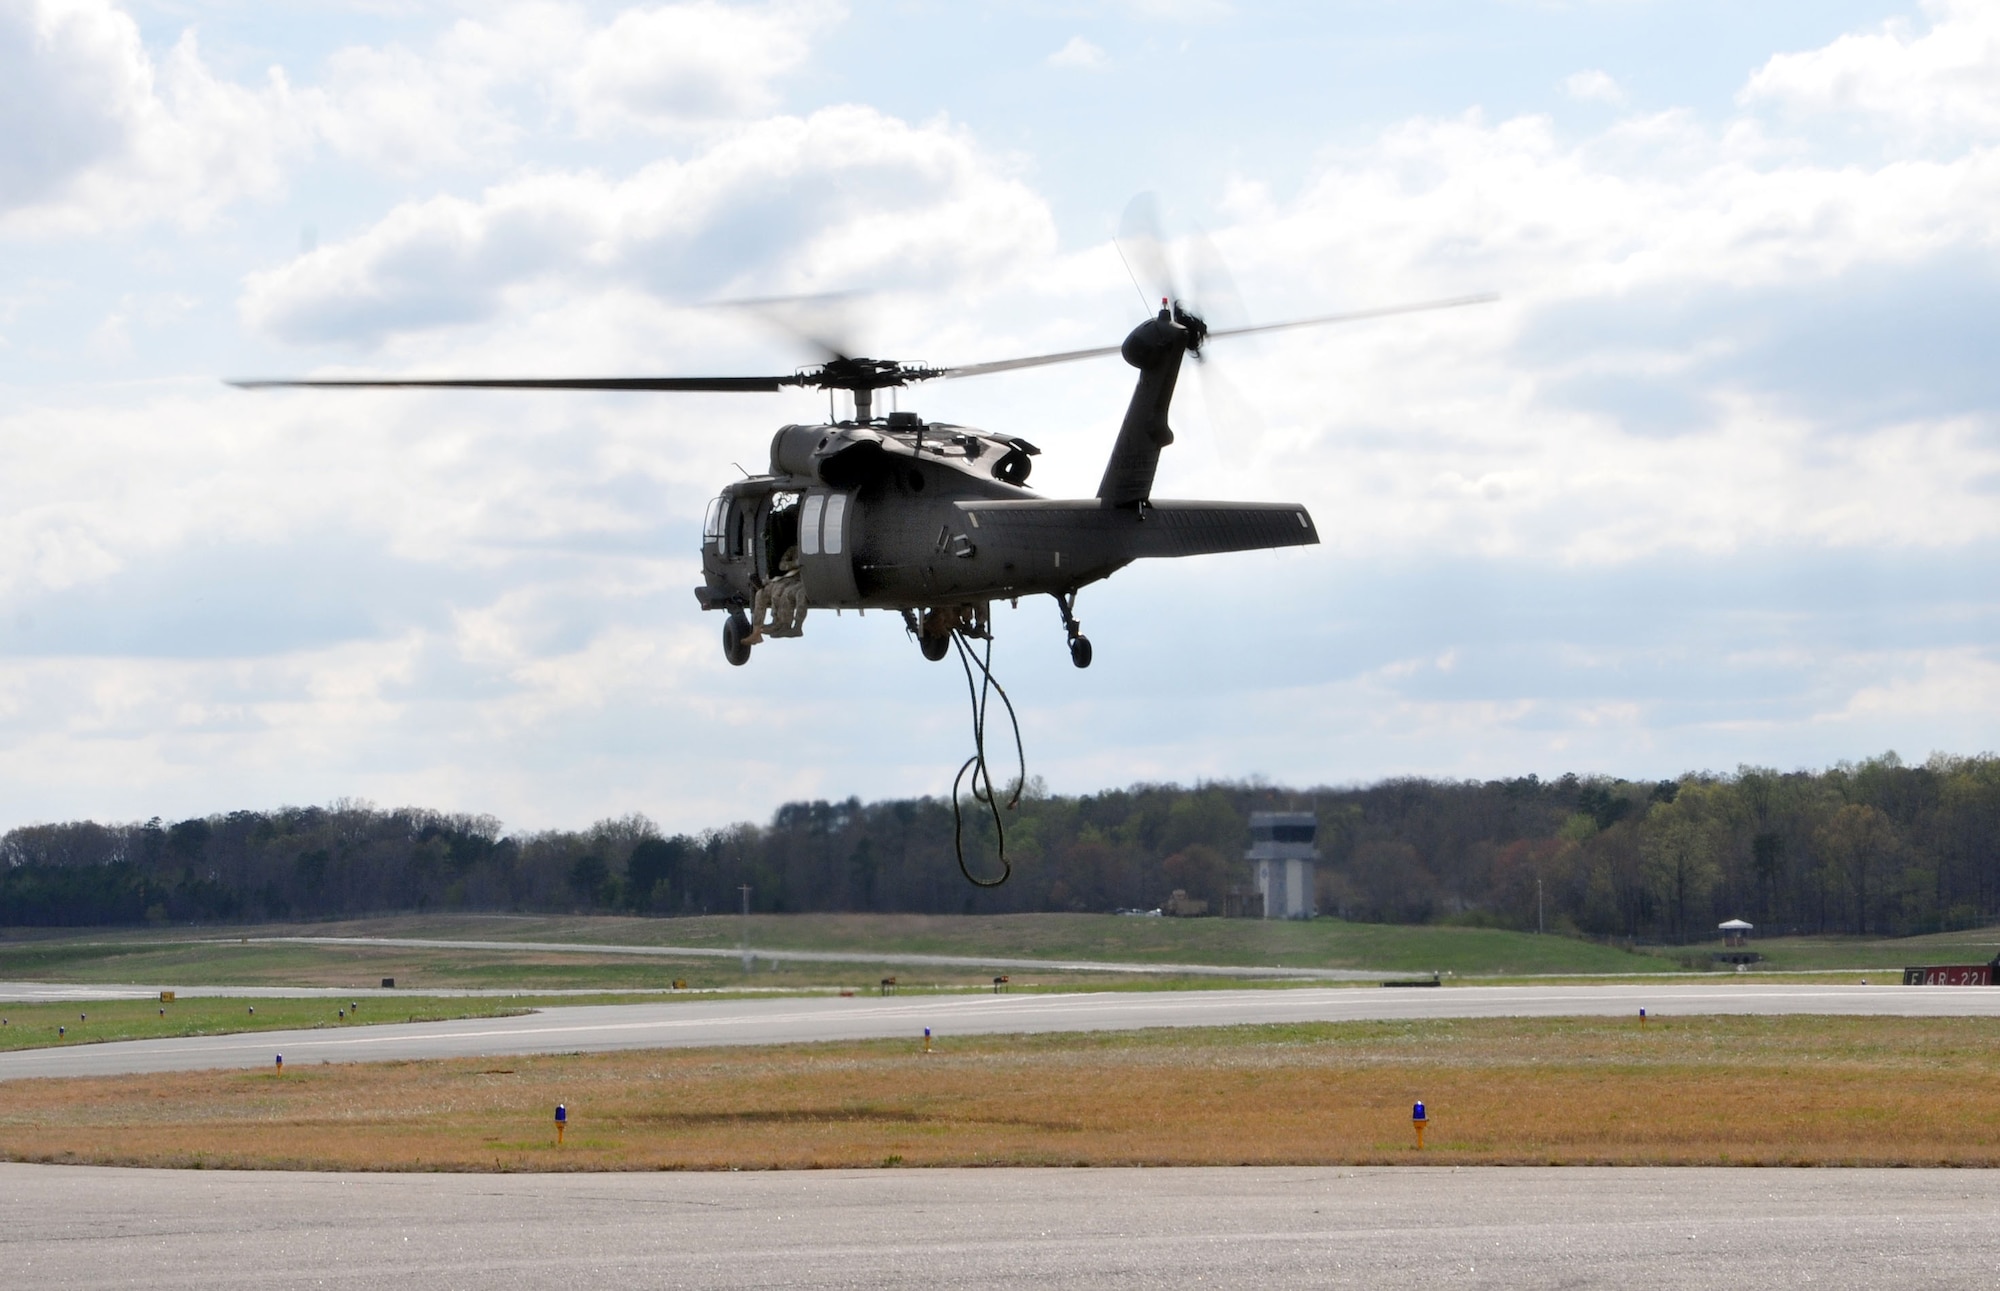 Members of the 118th Air Support Operations Squadron communicate with 235th Air Traffic Controllers who watch the skies from the control tower at Stanly County Airport, New London, N.C., April 8, 2015, while Soldiers from North Carolina Army National Guard, Company C, 1-131 AVN, conduct FAST rope insertion training from UH-60 Blackhawk helicopter. The 235th ATC has provided air traffic control services for all civilian and military aircraft since their infrastructure started in 1988 when they formed a partnership with Stanly County Airport. (U.S. Air National Guard photo by Master Sgt. Patricia F. Moran, 145th Public Affairs/Released)